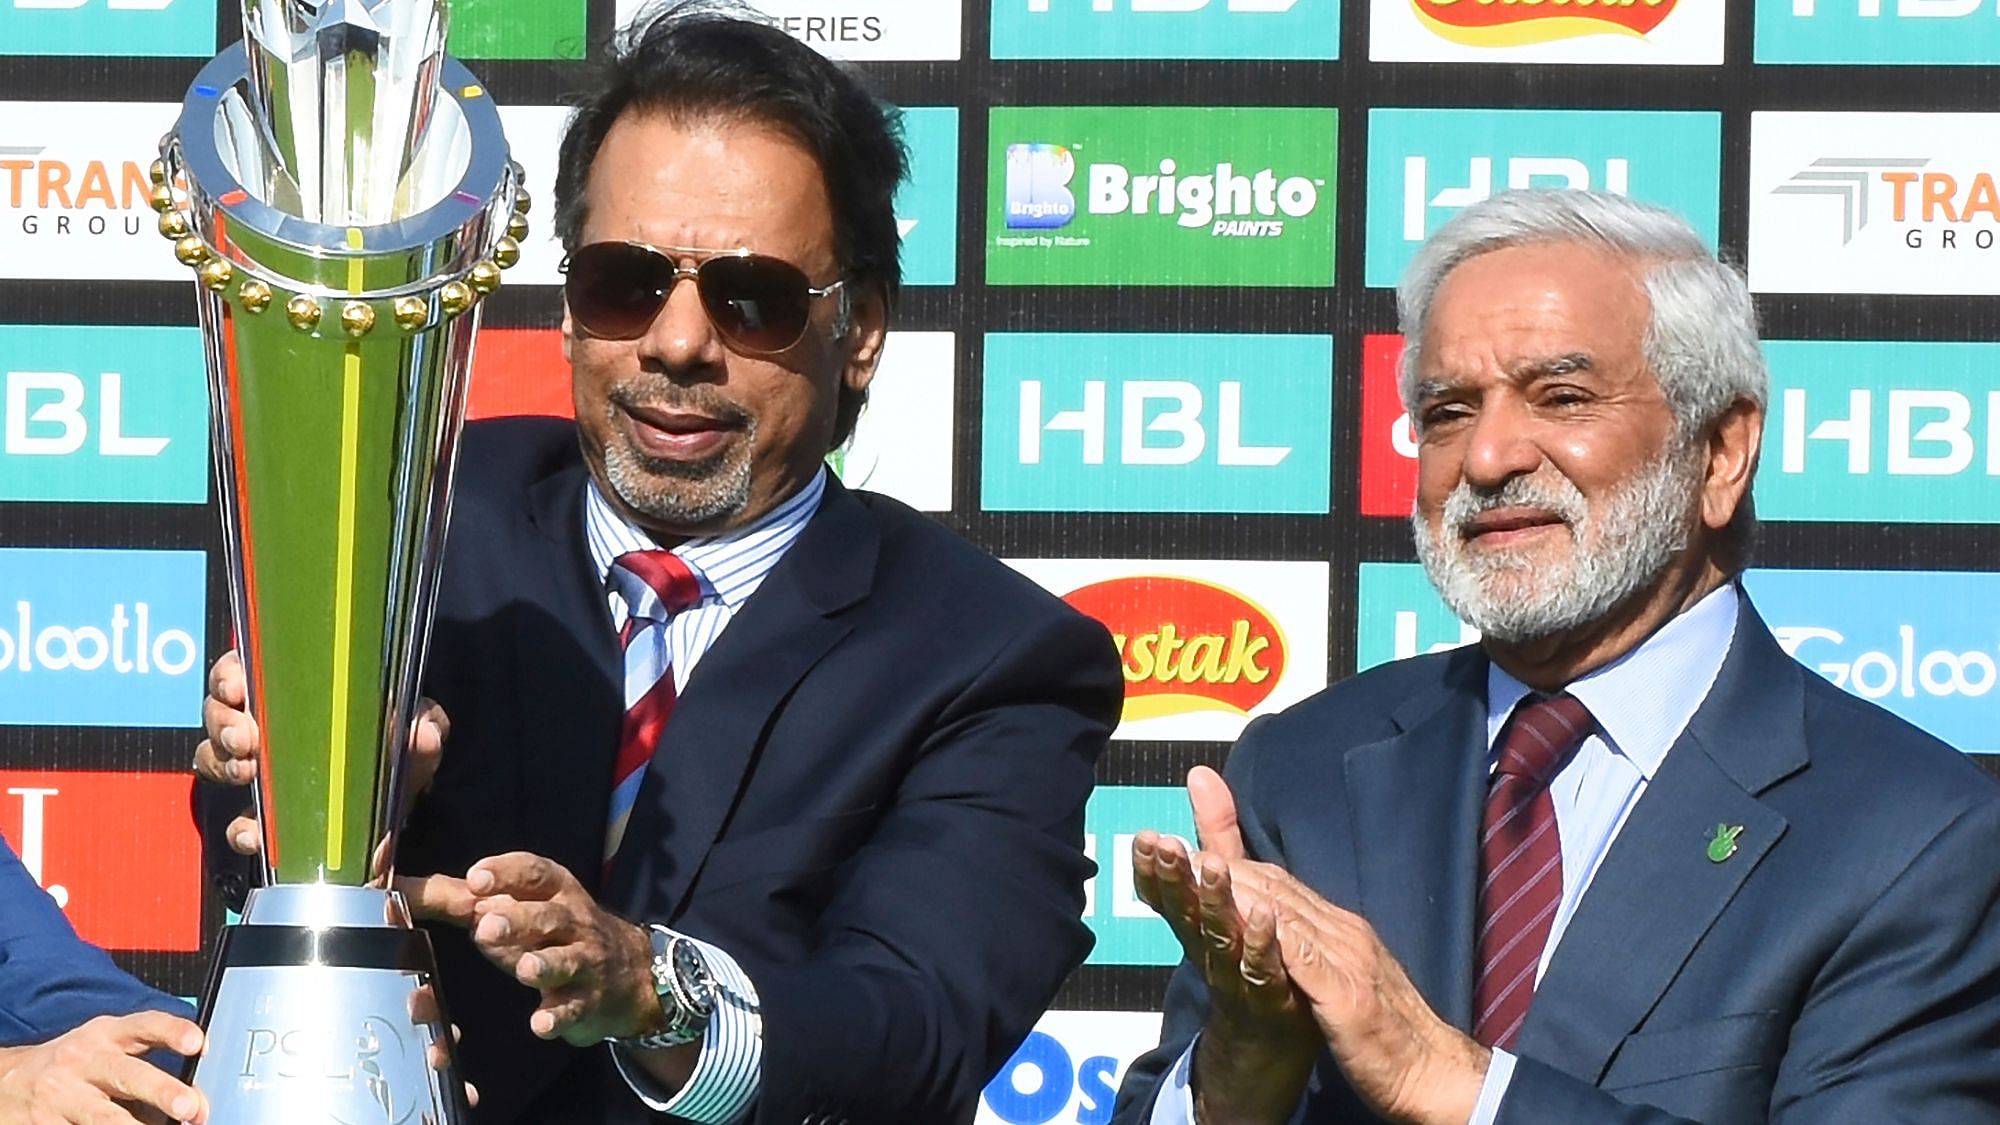 Pakistan’s former squash world champion Jahangir Khan unveils the PSL trophy at the National Stadium in Karachi, Pakistan with Chief of Pakistan Cricket Board Ehsan Mani, right, Wednesday, Feb. 19, 2020.